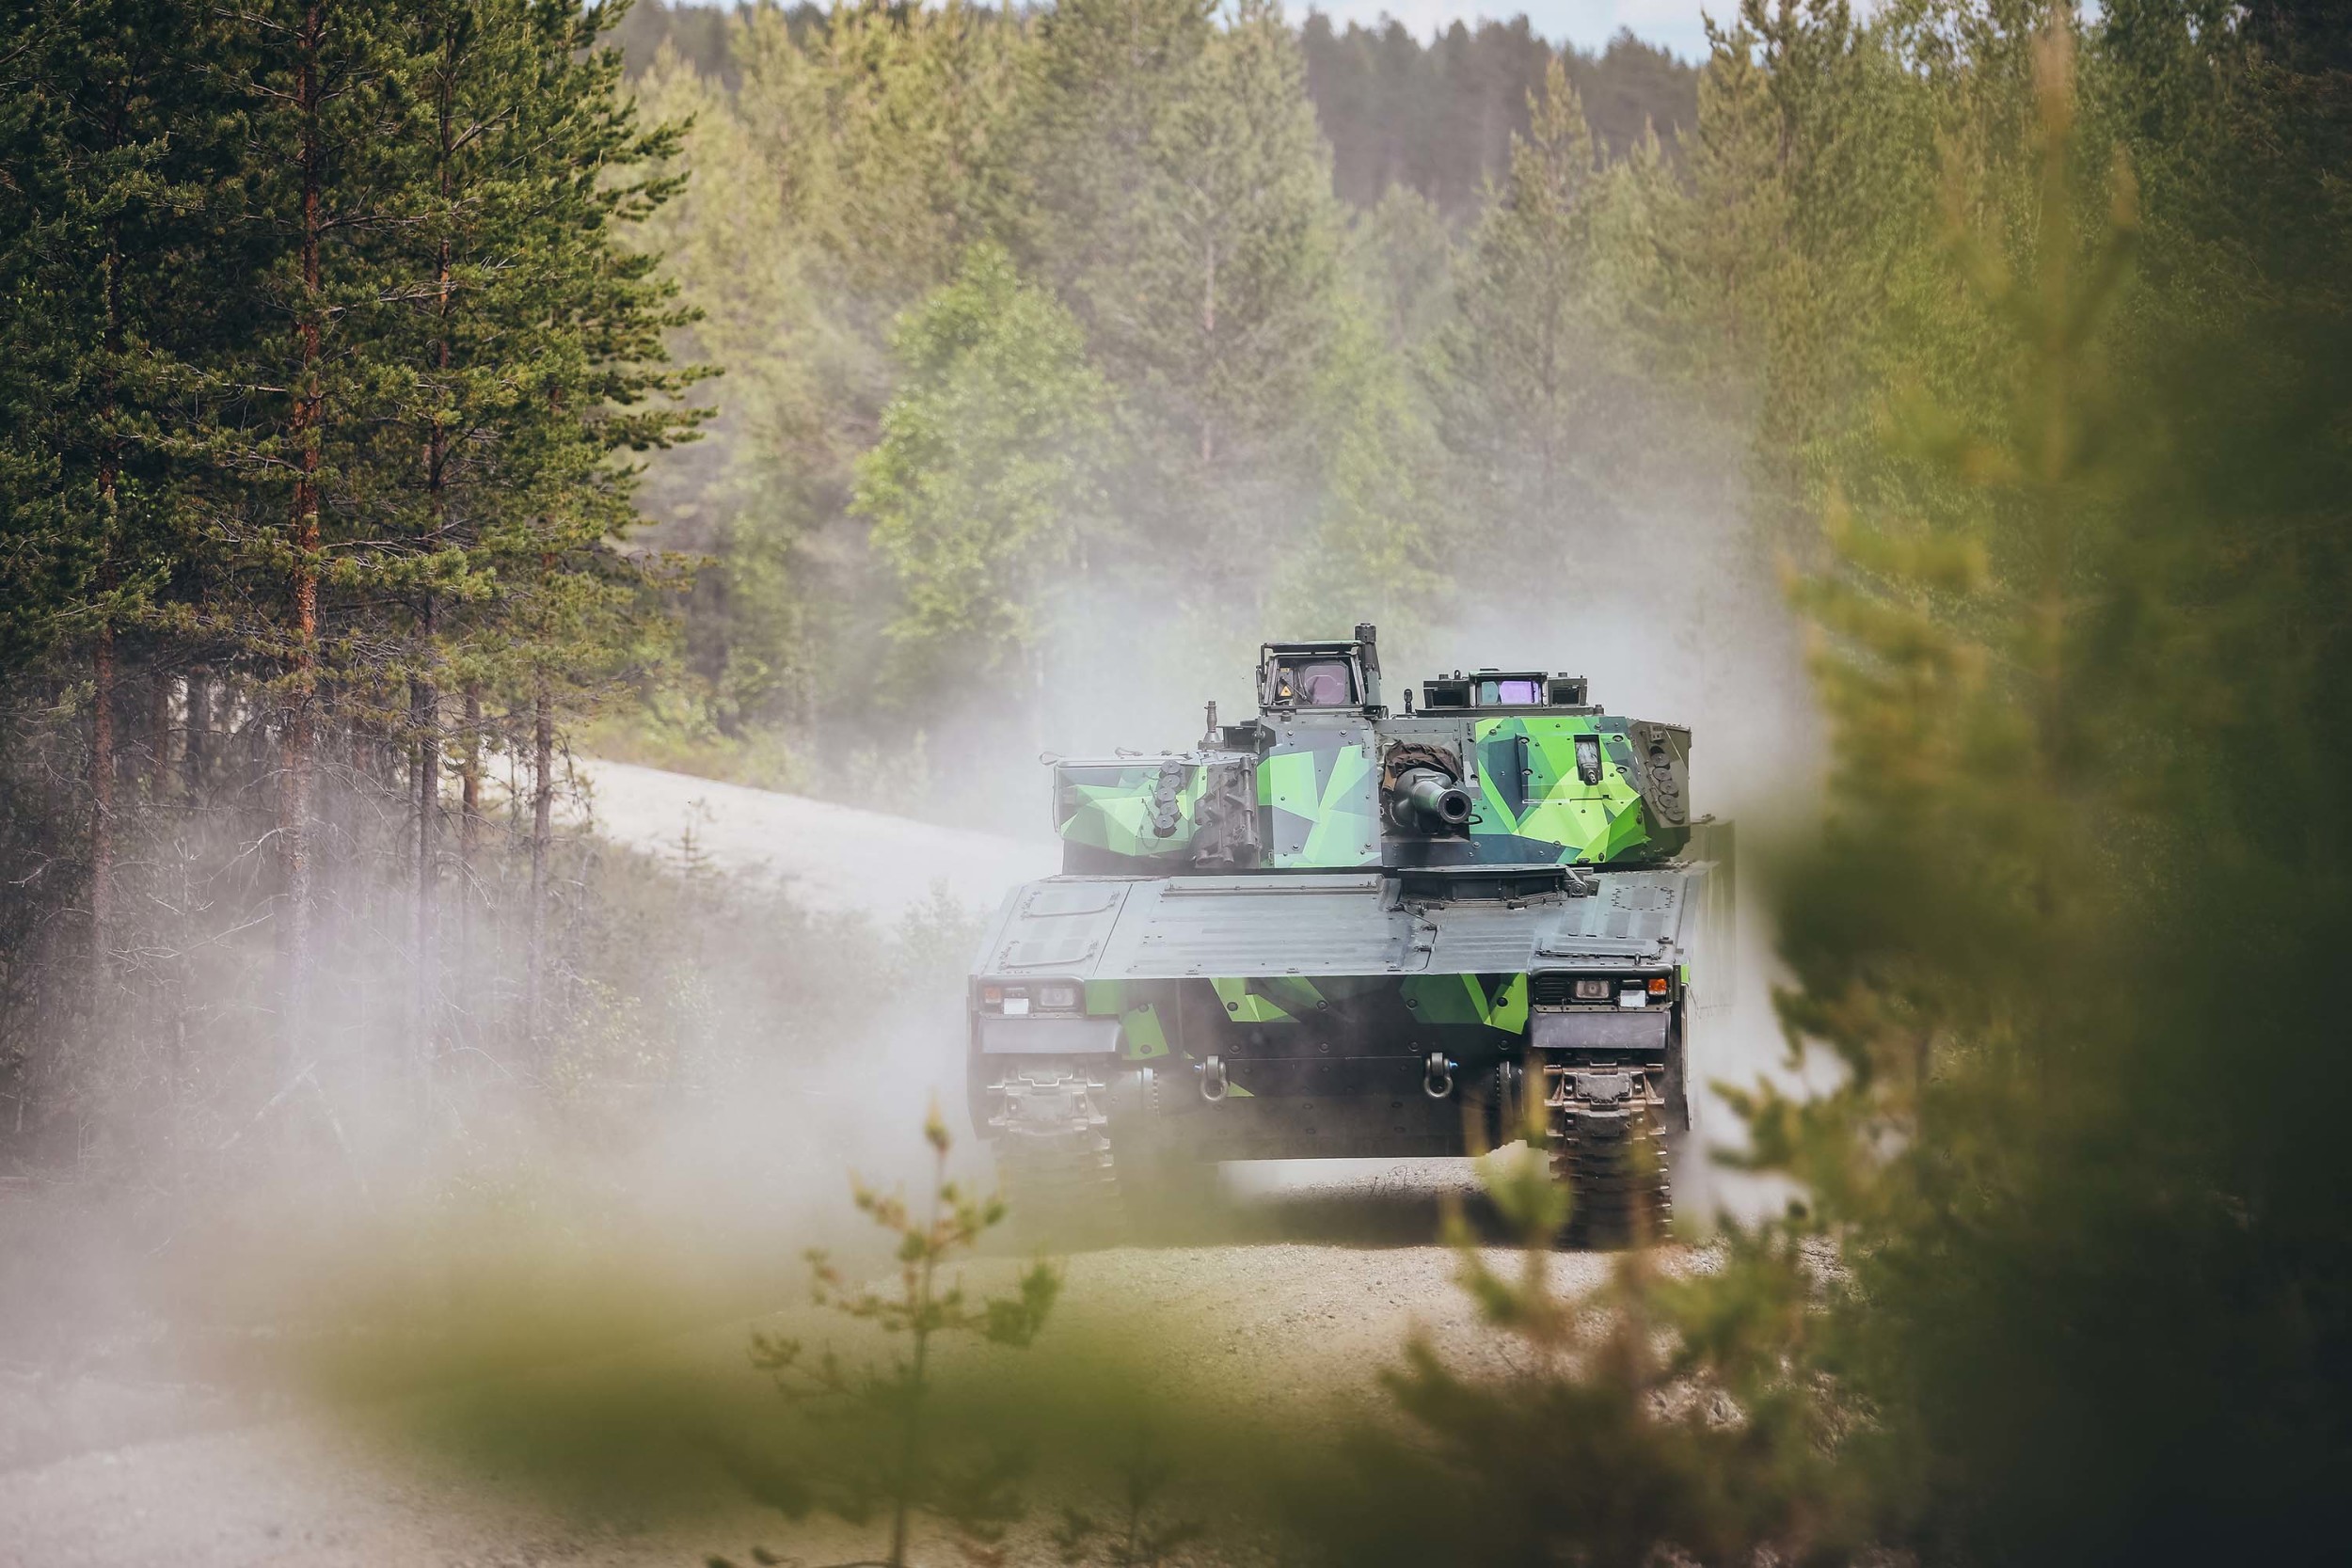 CV90-equipped-with-Saab-sight-and-fire-control-capability